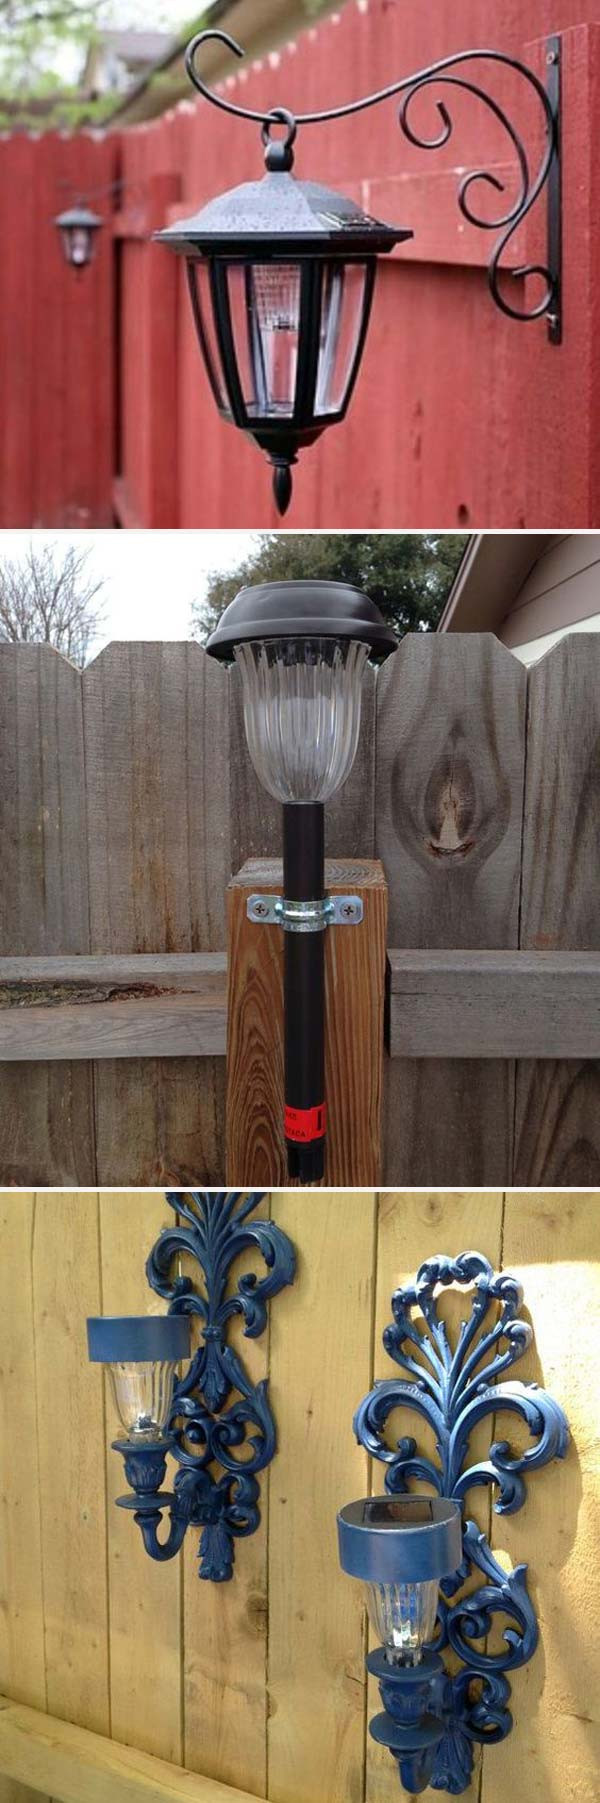 DIY Outdoor Light
 20 Cool and Easy DIY Ideas to Display Your Solar Lighting